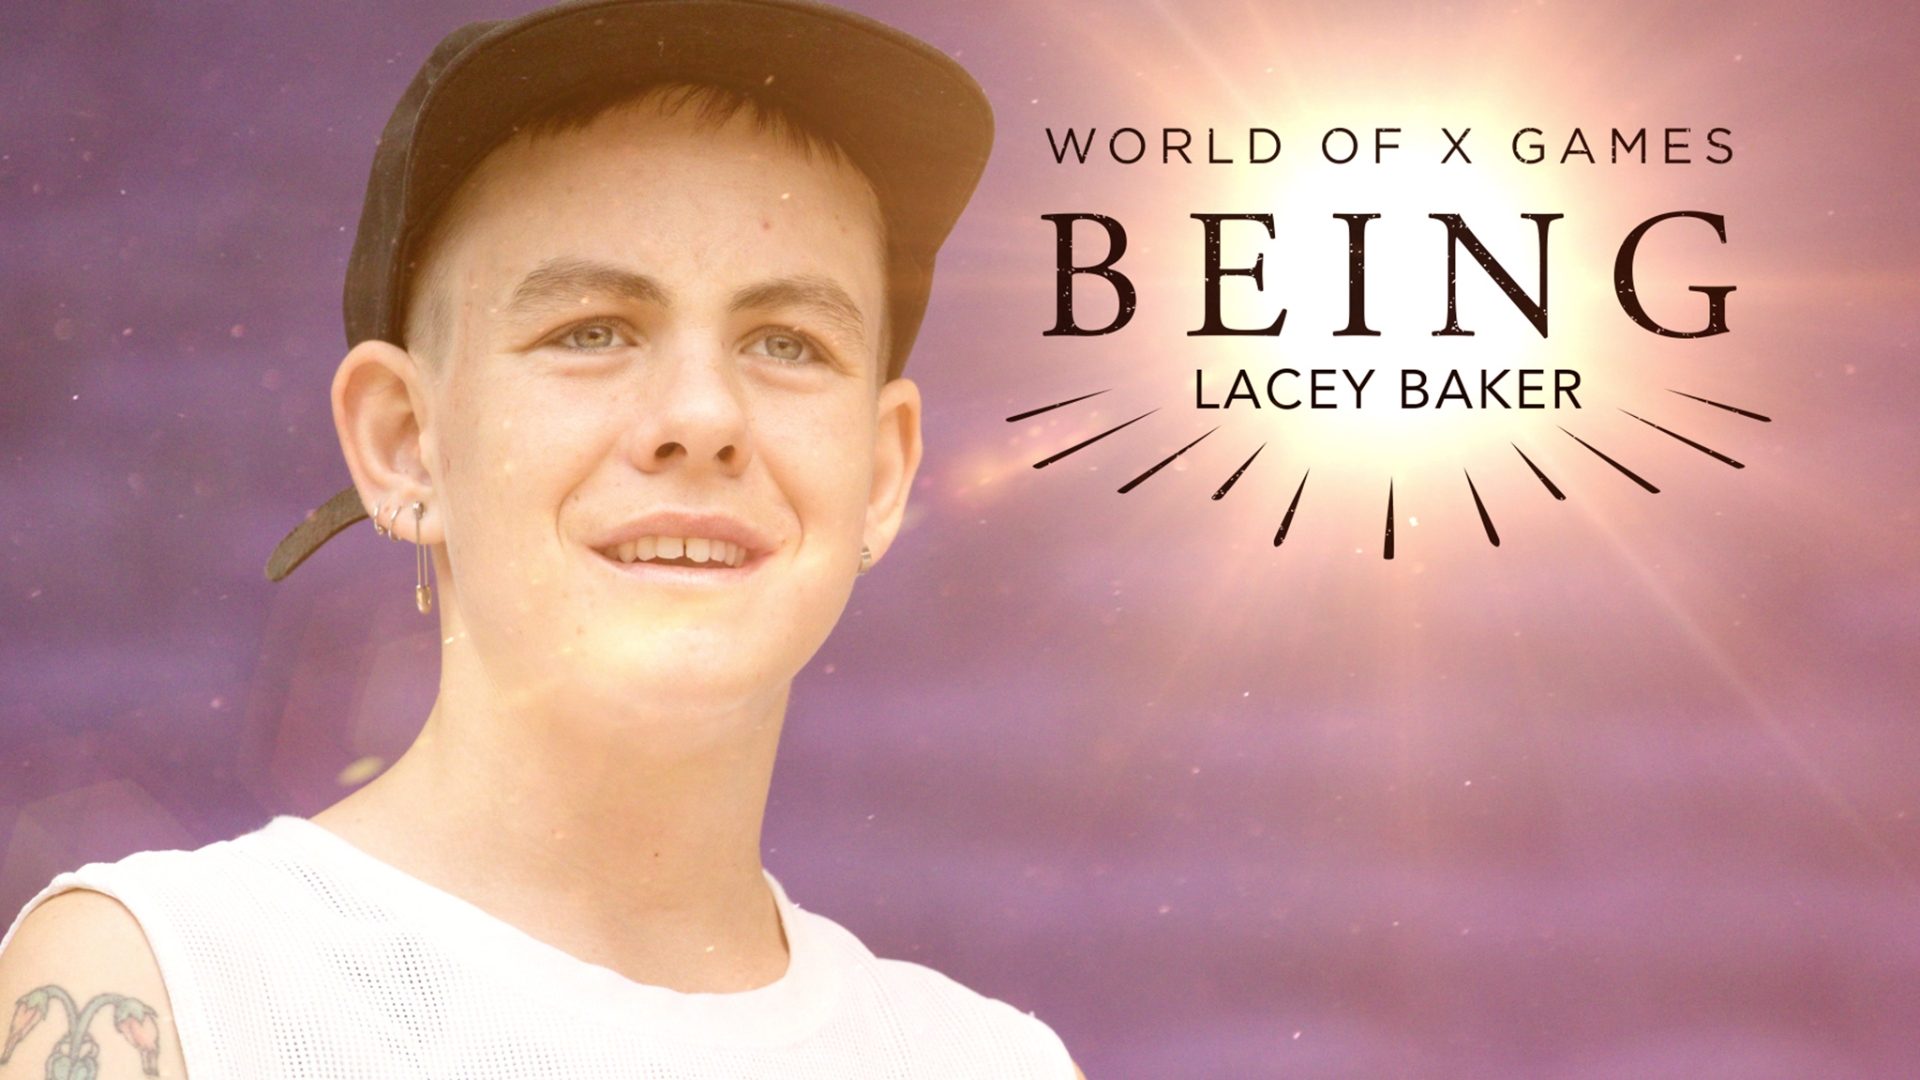 Being: Lacey Baker